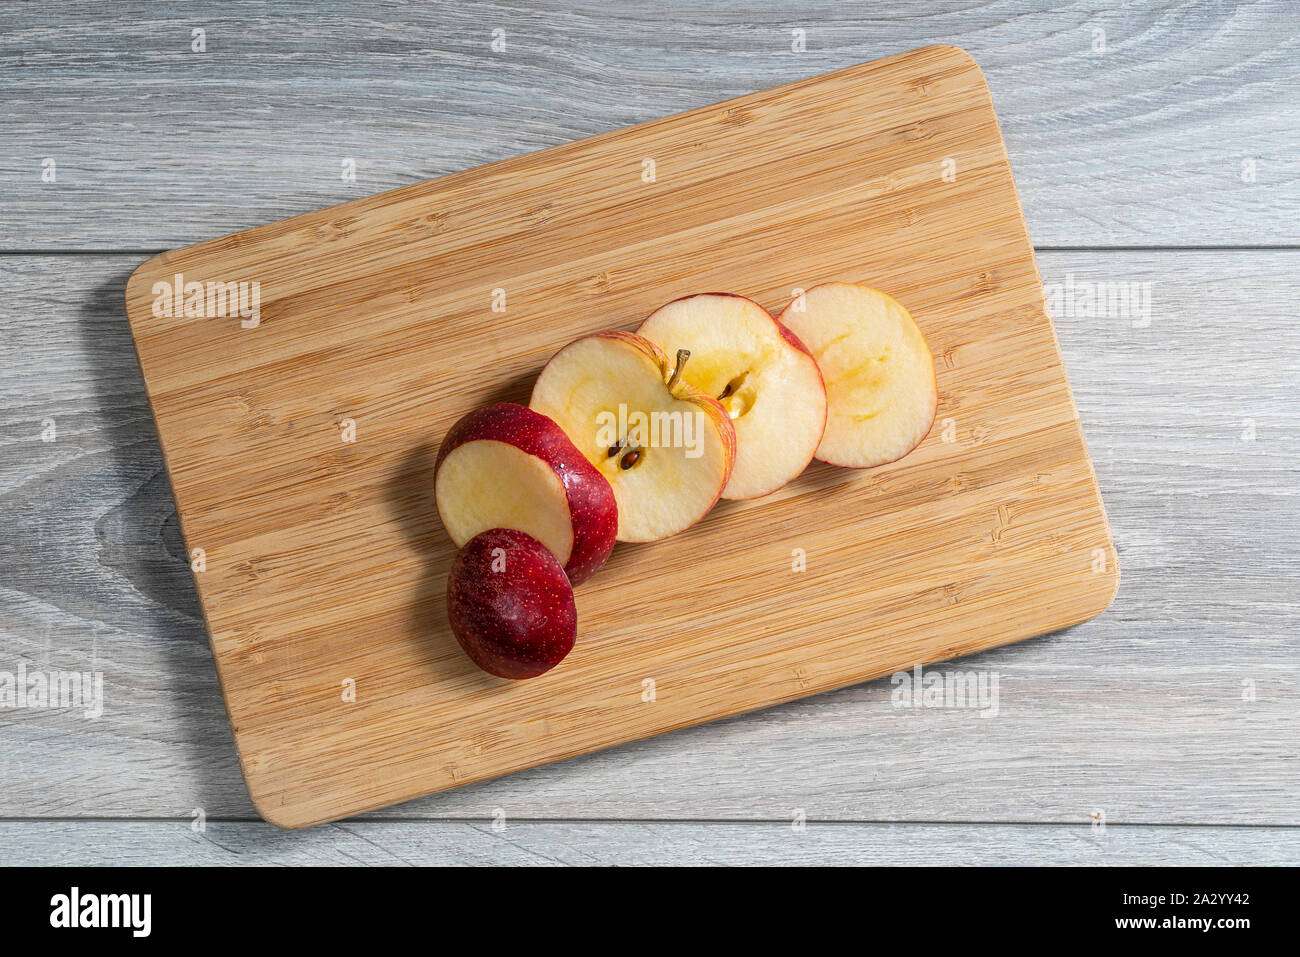 a red apple sliced on a wooden board Stock Photo